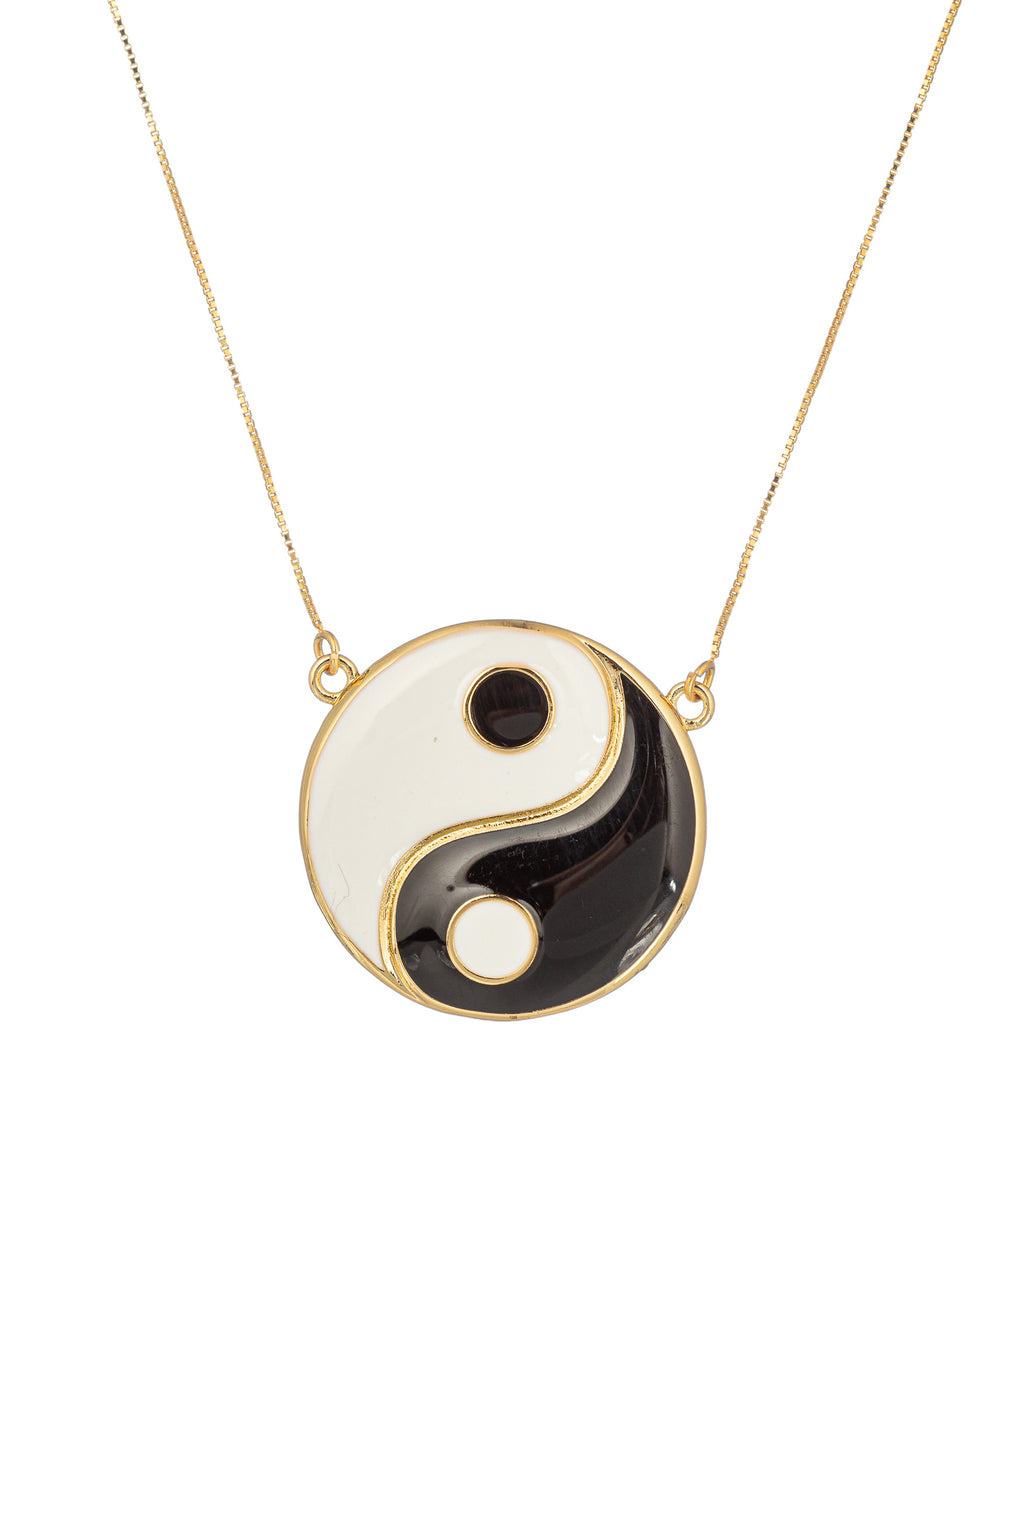 Gold tone brass yin & yang pendant on a sterling silver chain.